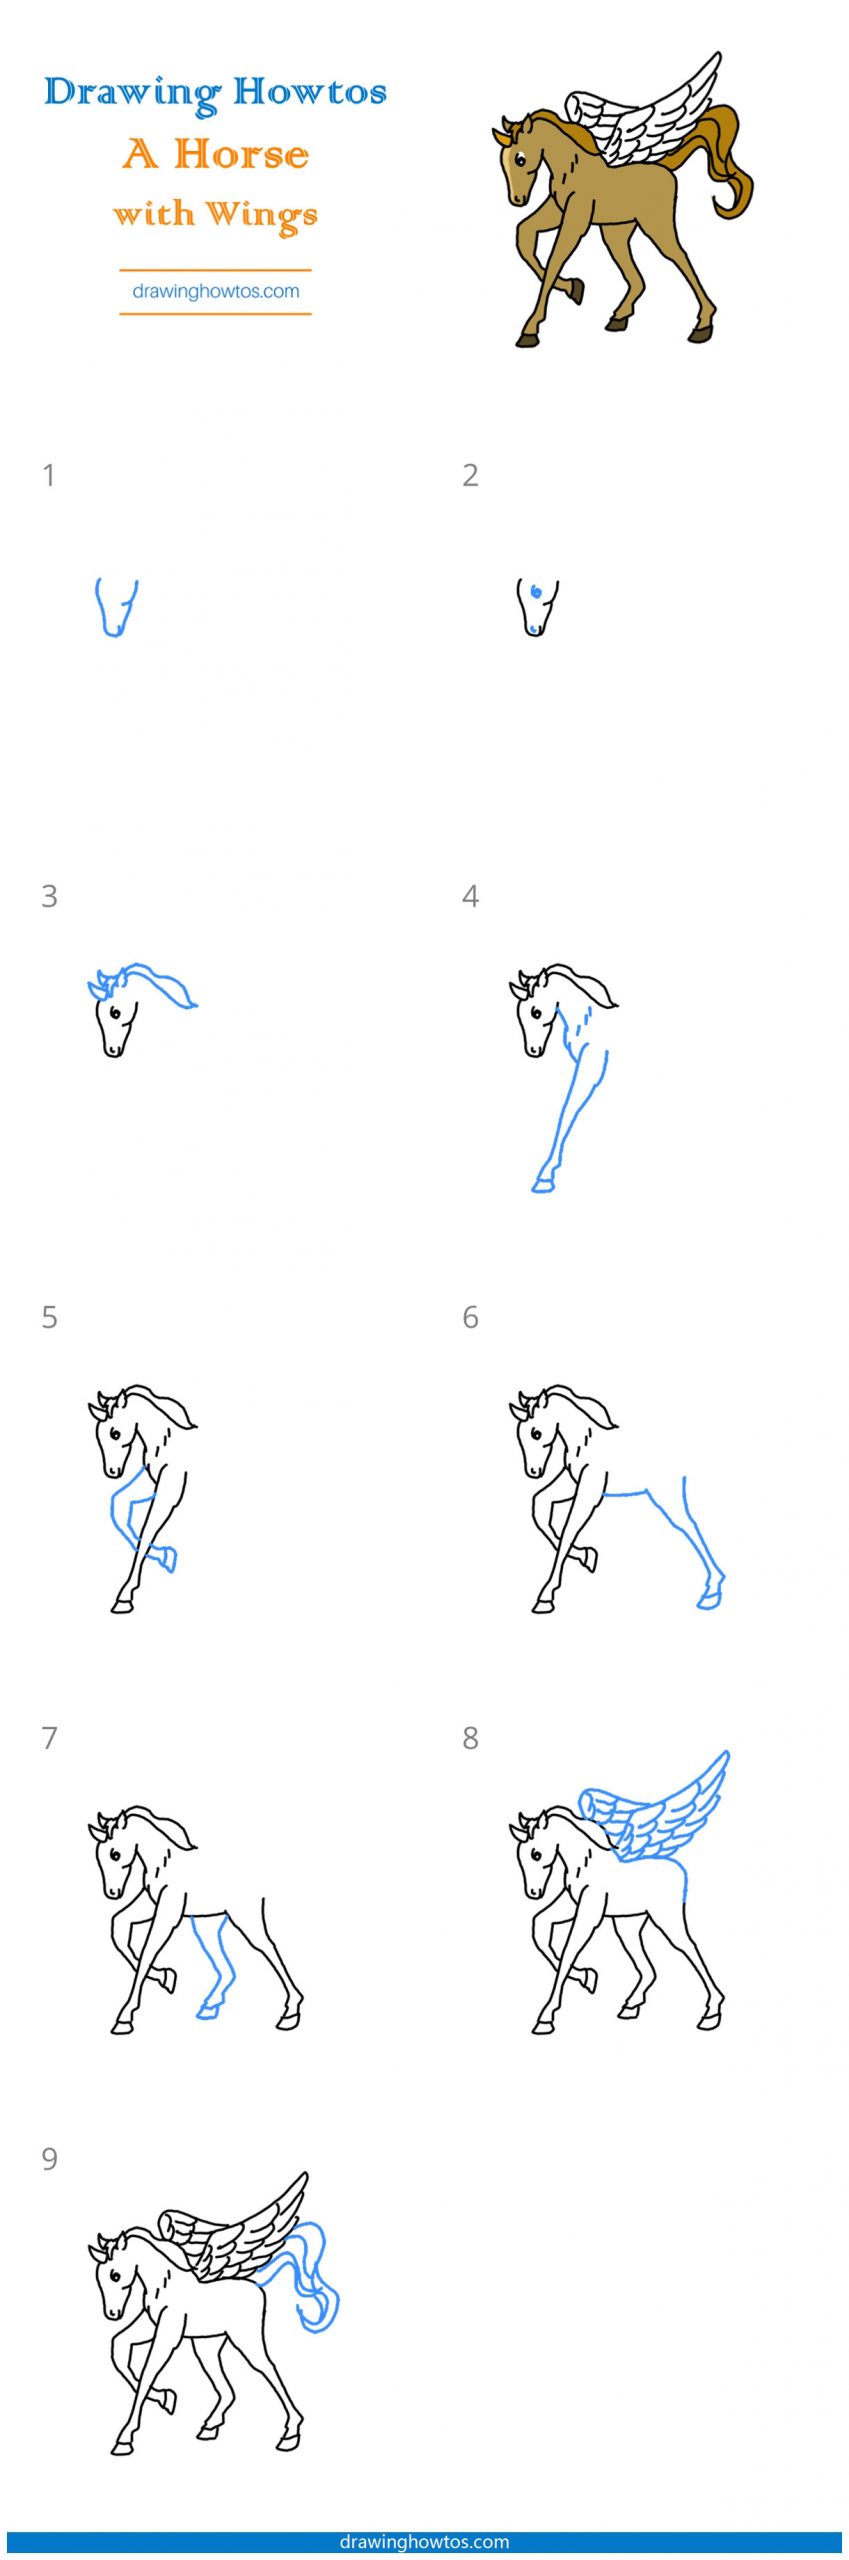 How to Draw a Horse with Wings Step by Step